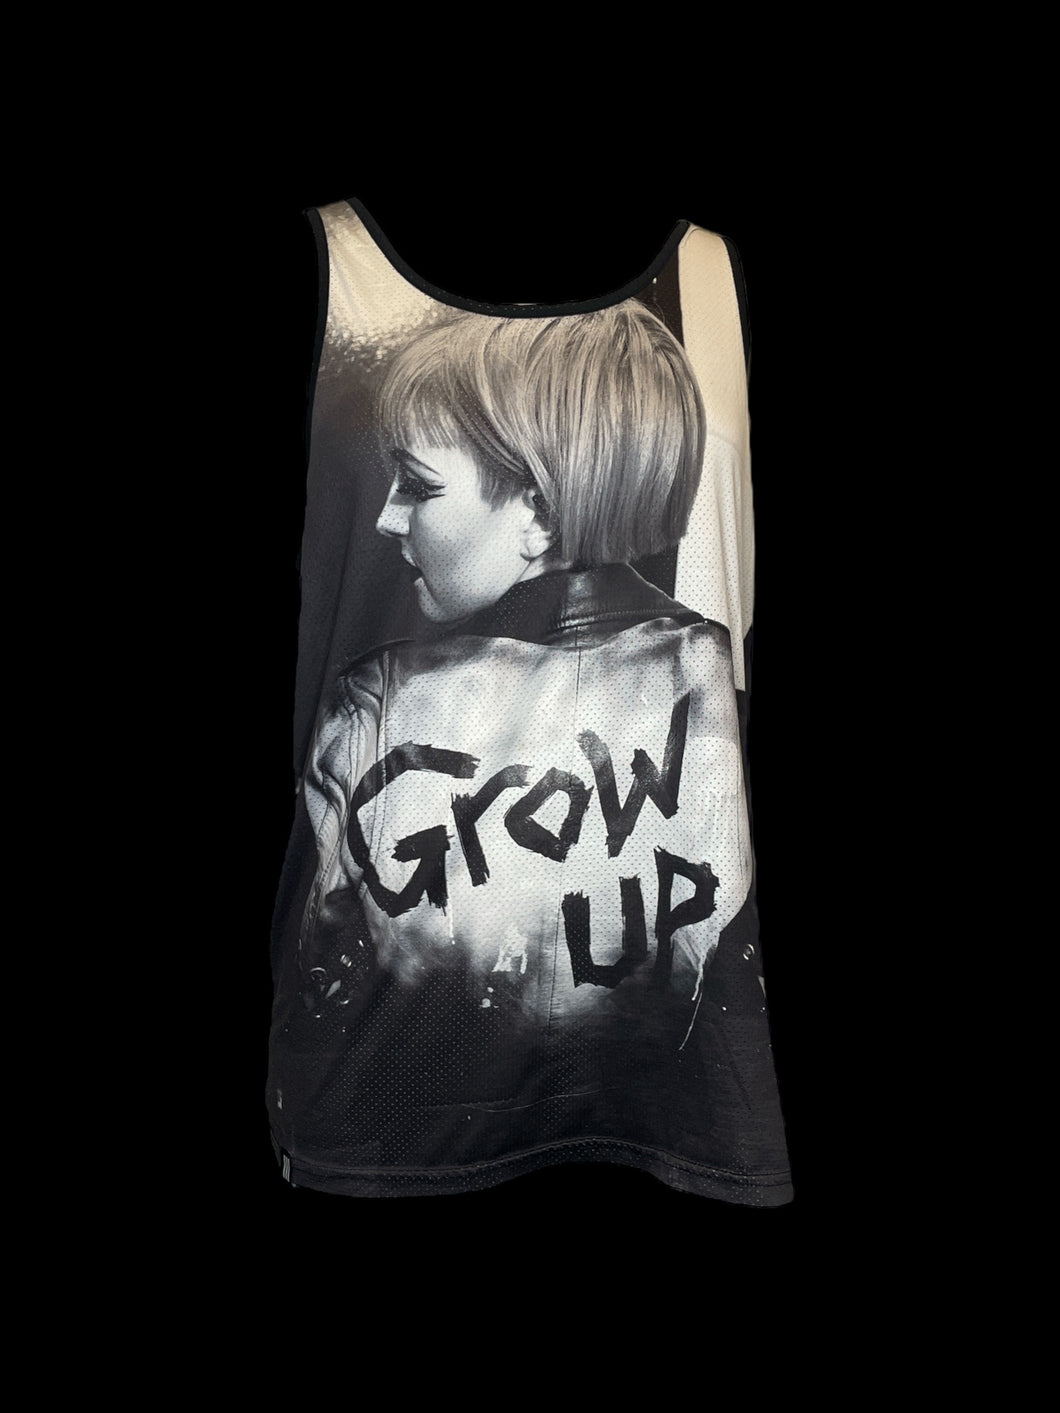 0X Greyscale sleeveless athletic mesh top w/ graphic of person wearing jacket w/ text reading “Grow Up”